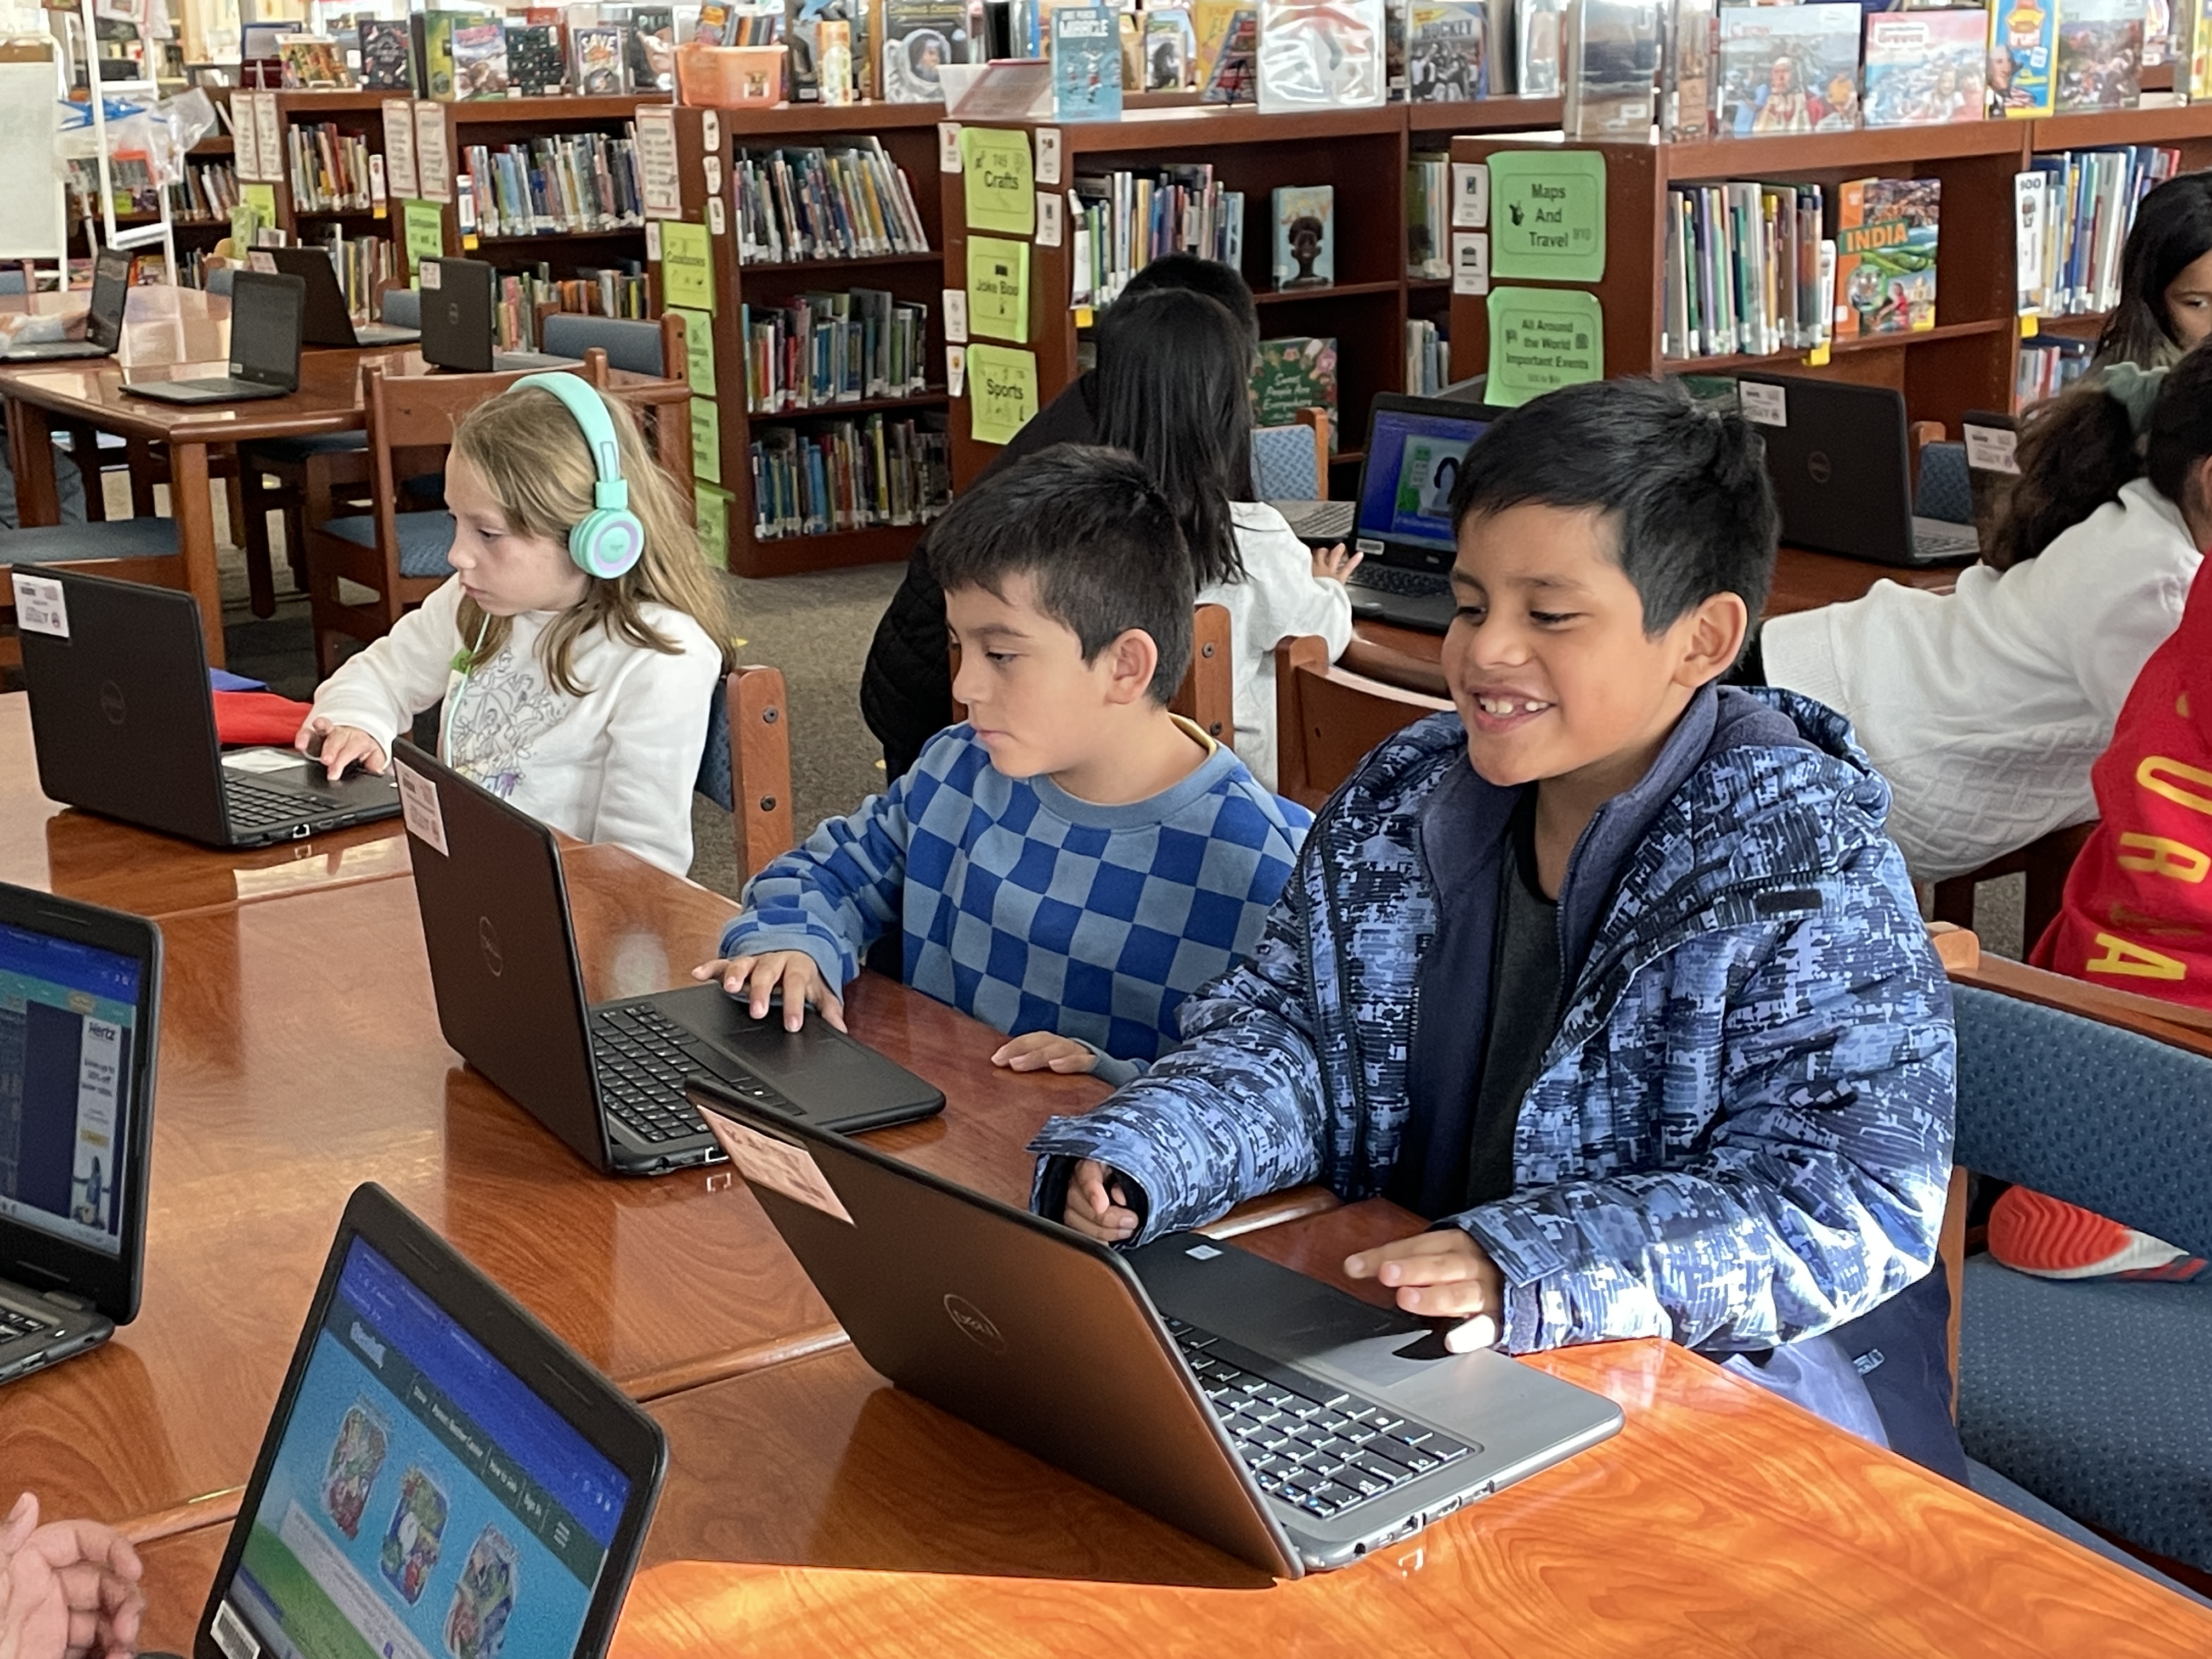 Students smile while using computers in the library during tech time